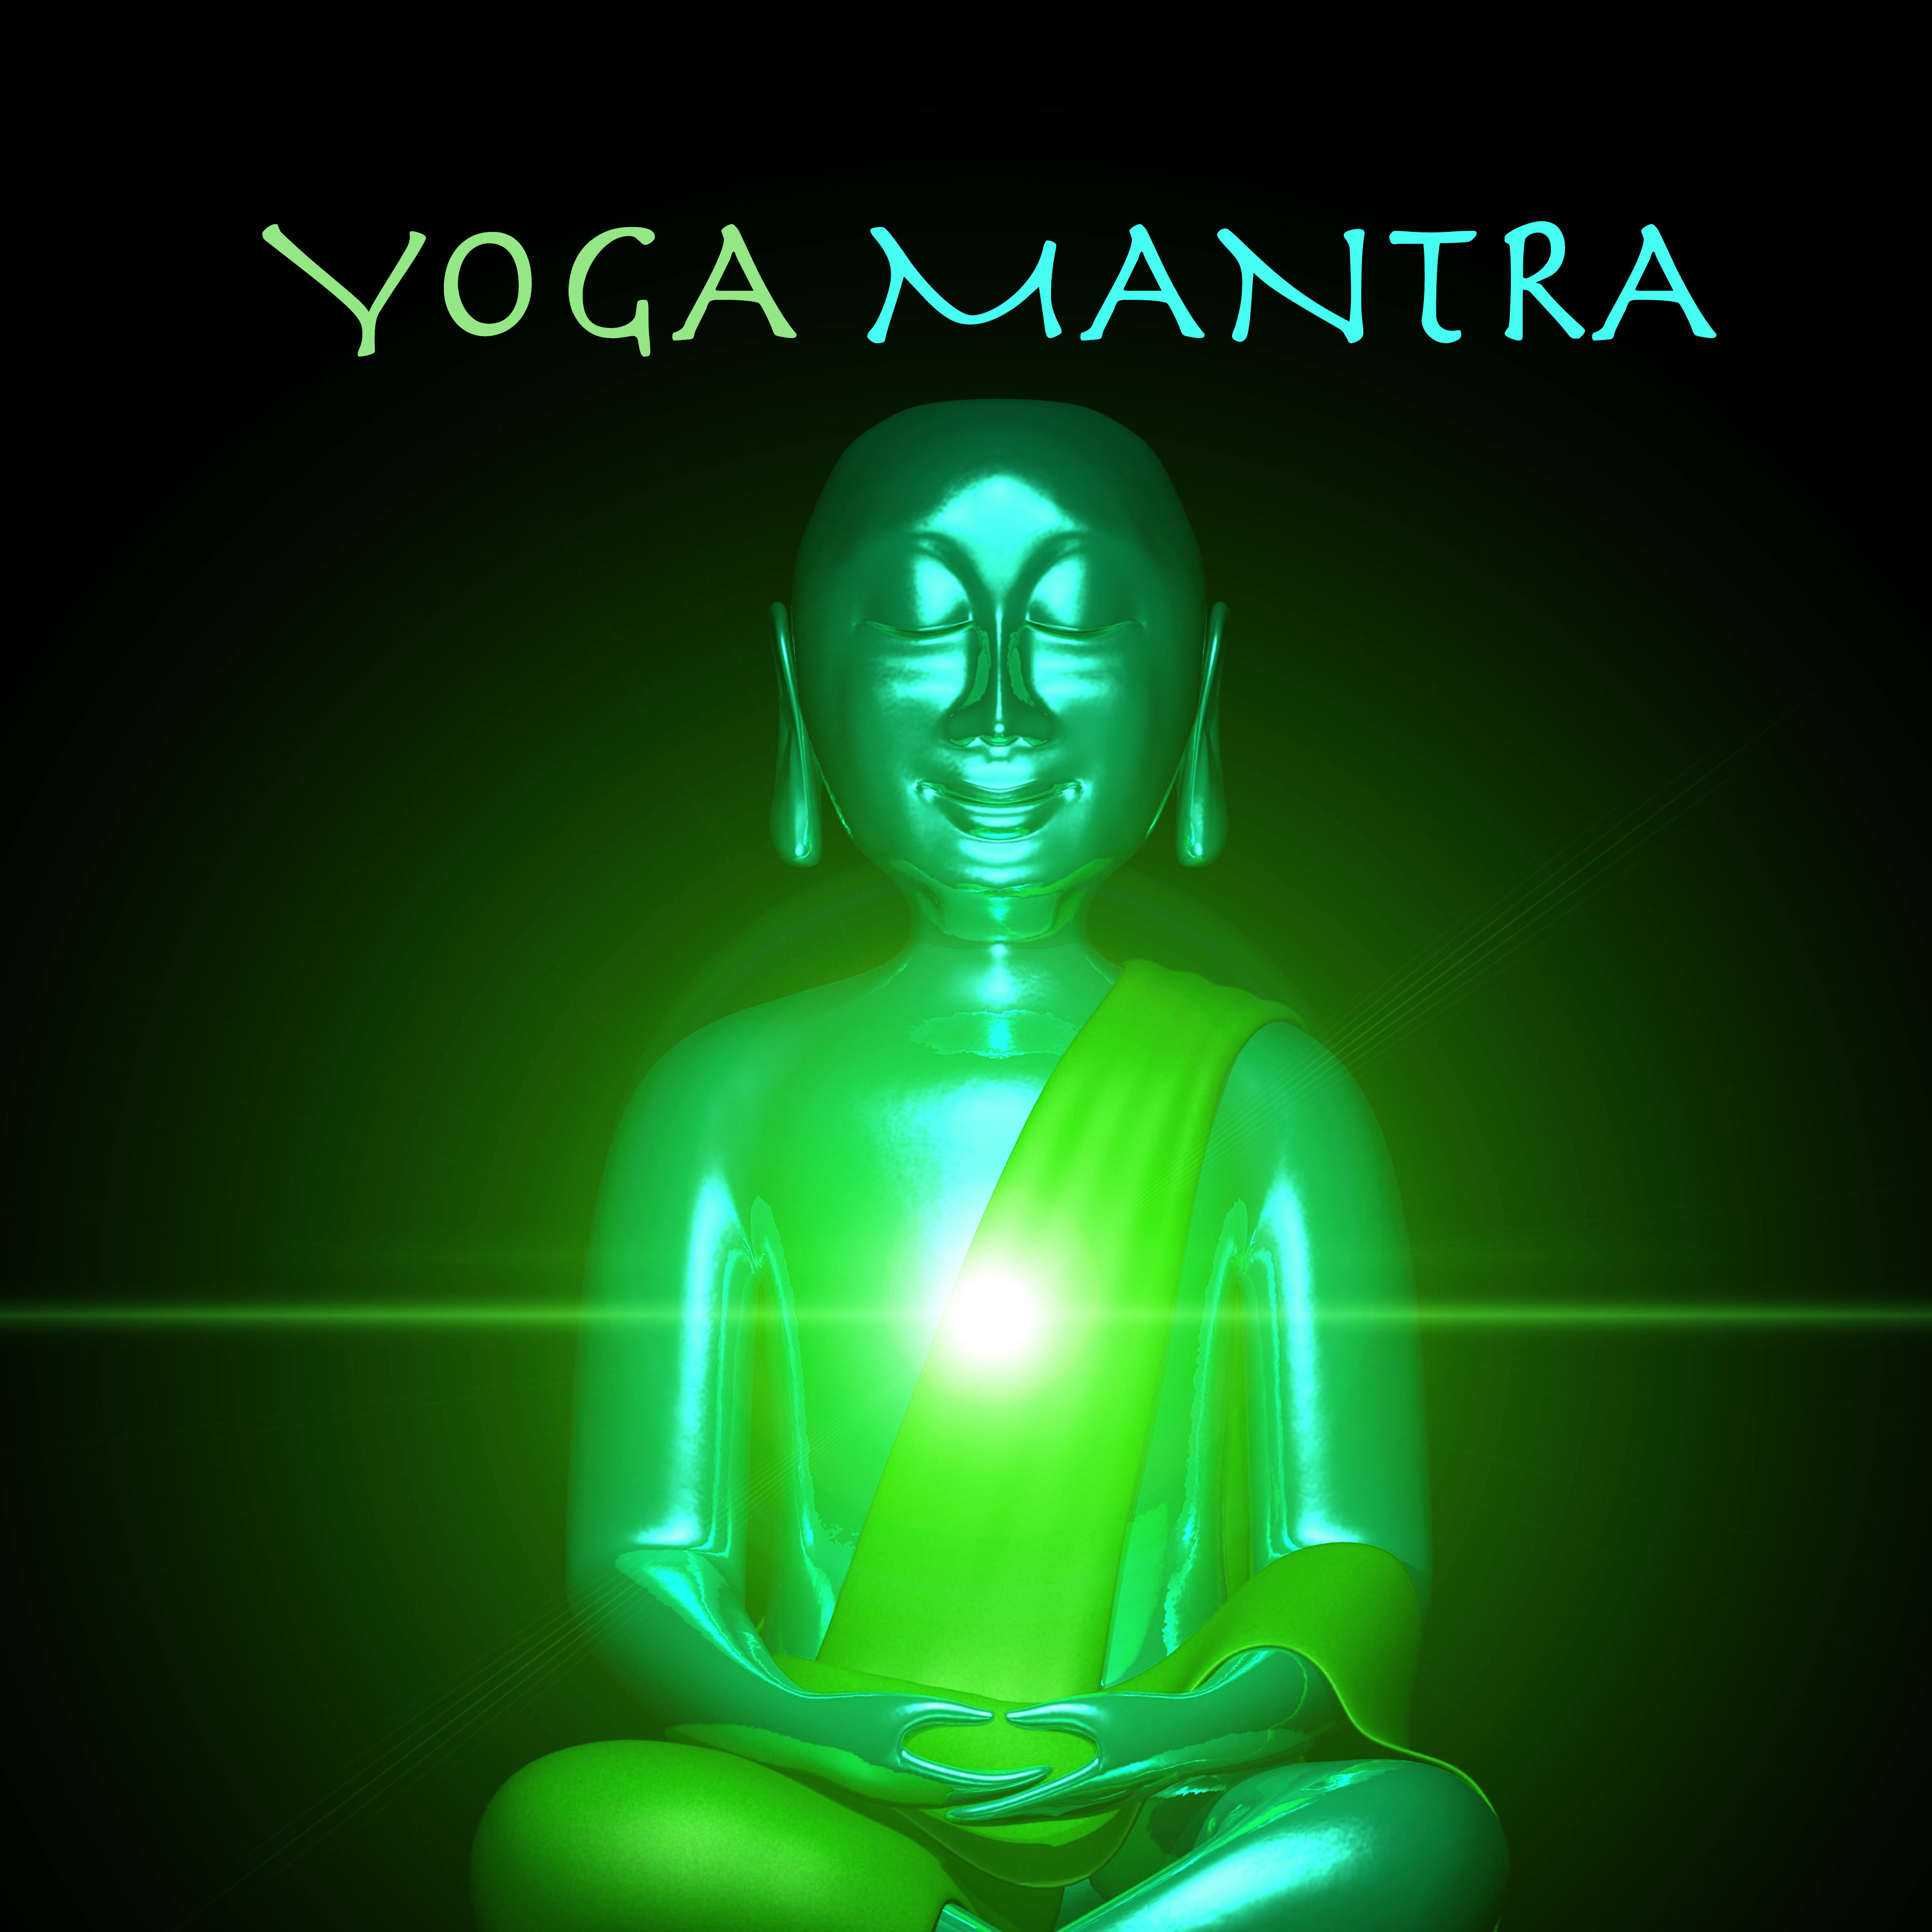 Yoga Mantra - Chanting Om, Mindfulness Meditation and Relaxation Music